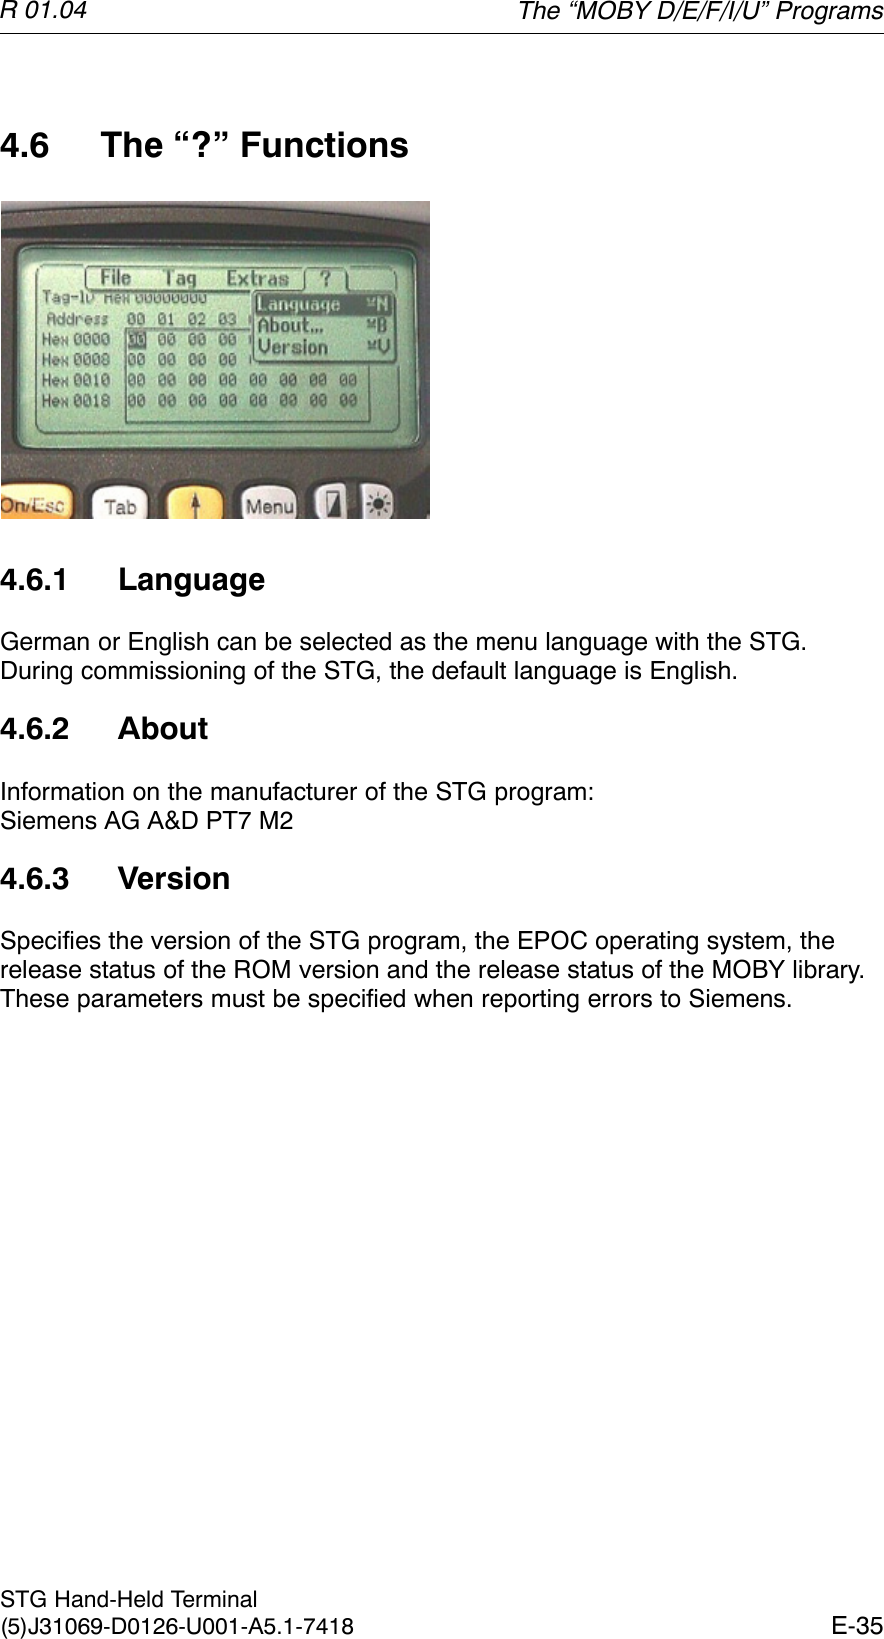 R 01.04E-35STG Hand-Held Terminal(5)J31069-D0126-U001-A5.1-74184.6 The “?” Functions4.6.1 LanguageGerman or English can be selected as the menu language with the STG.During commissioning of the STG, the default language is English.4.6.2 AboutInformation on the manufacturer of the STG program: Siemens AG A&amp;D PT7 M24.6.3 VersionSpecifies the version of the STG program, the EPOC operating system, therelease status of the ROM version and the release status of the MOBY library.These parameters must be specified when reporting errors to Siemens.The “MOBY D/E/F/I/U” Programs